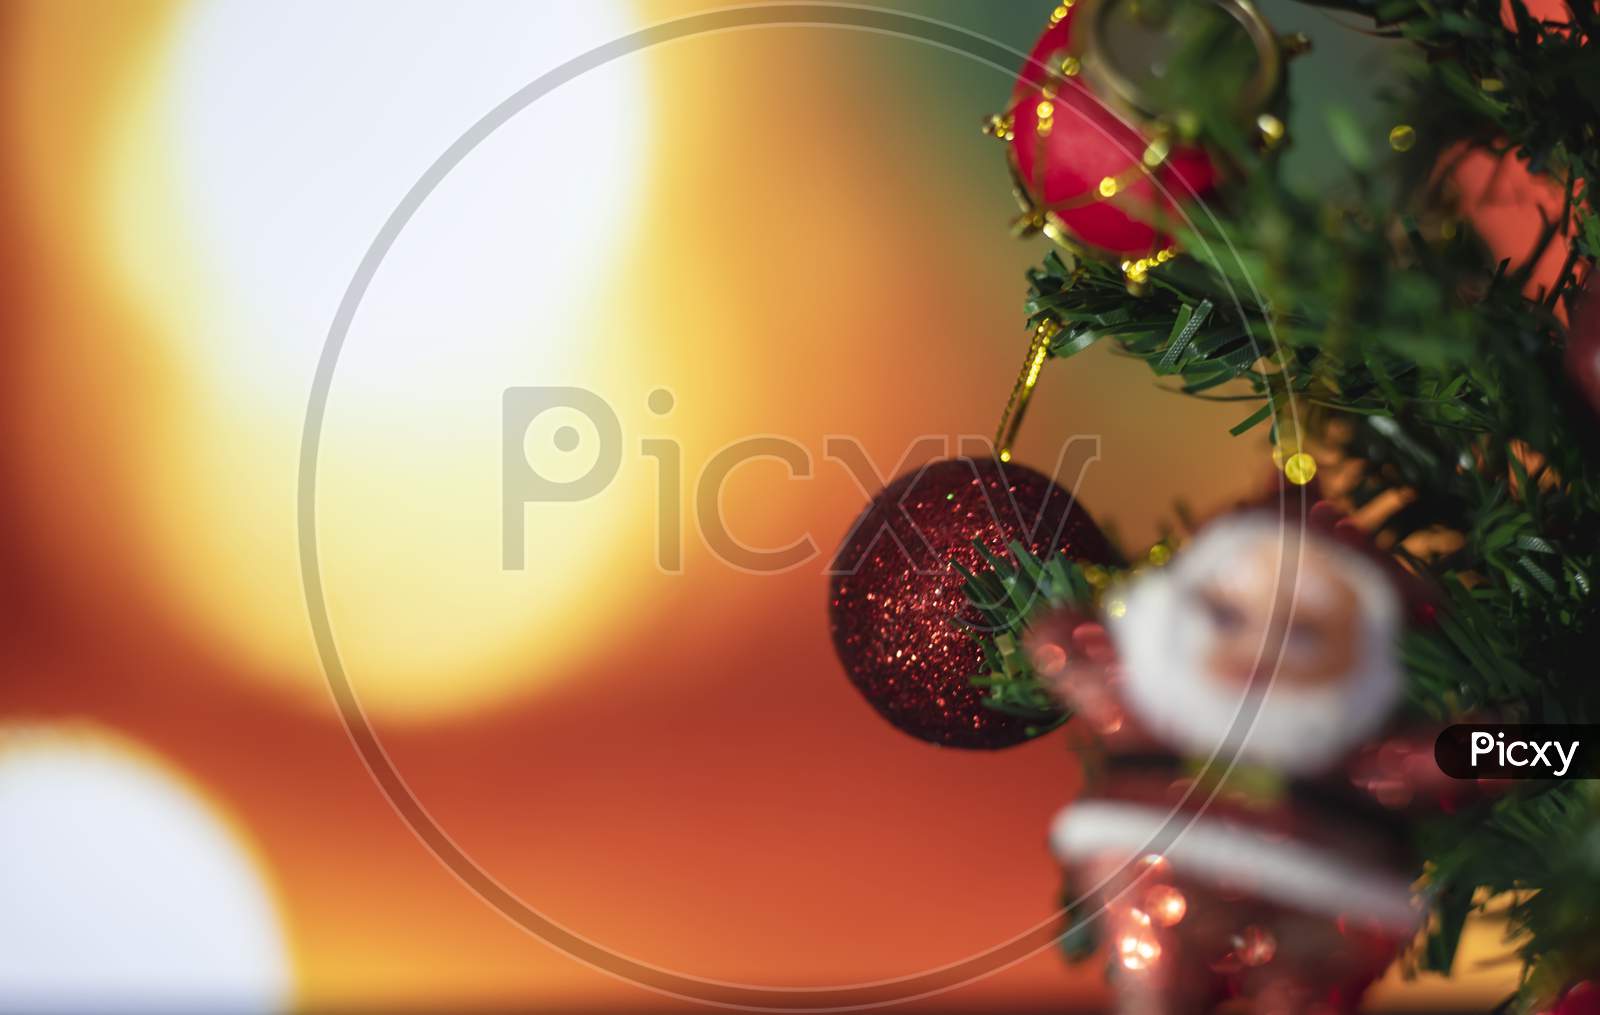 Decorated Christmas Tree On Blurred Background.